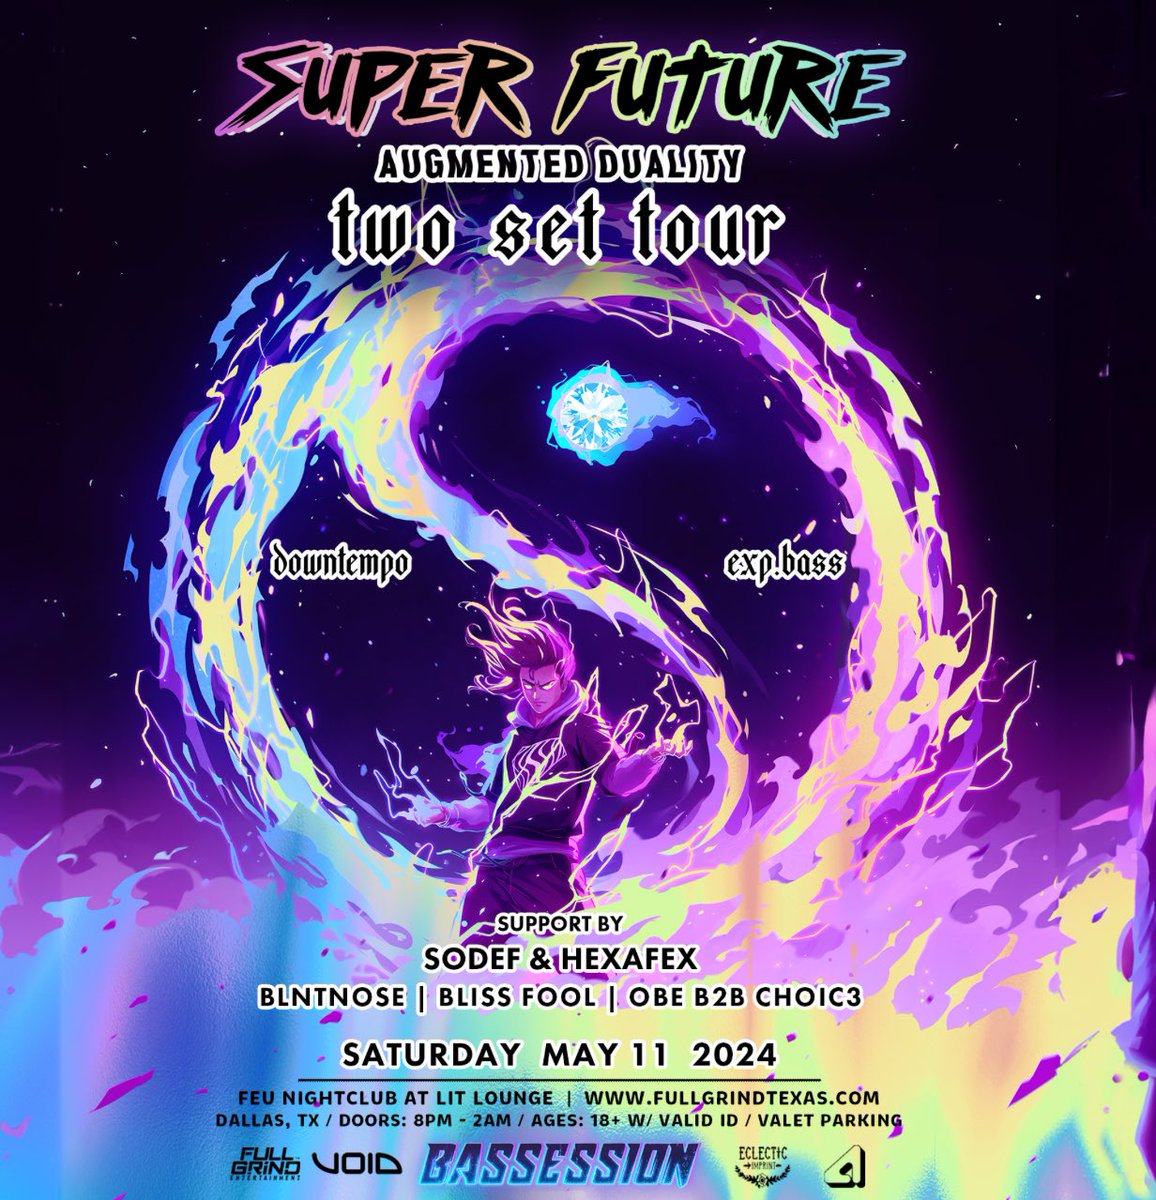 It’s a @SuperFutureDJ weekend in Texas! Friday, Doing tings in Houston with the fellas @zondosounds & @VGuerillaz Then going defcon 5 mode in Dallas, Ass will be thrown, the ground will shake & the authorities have been warned!